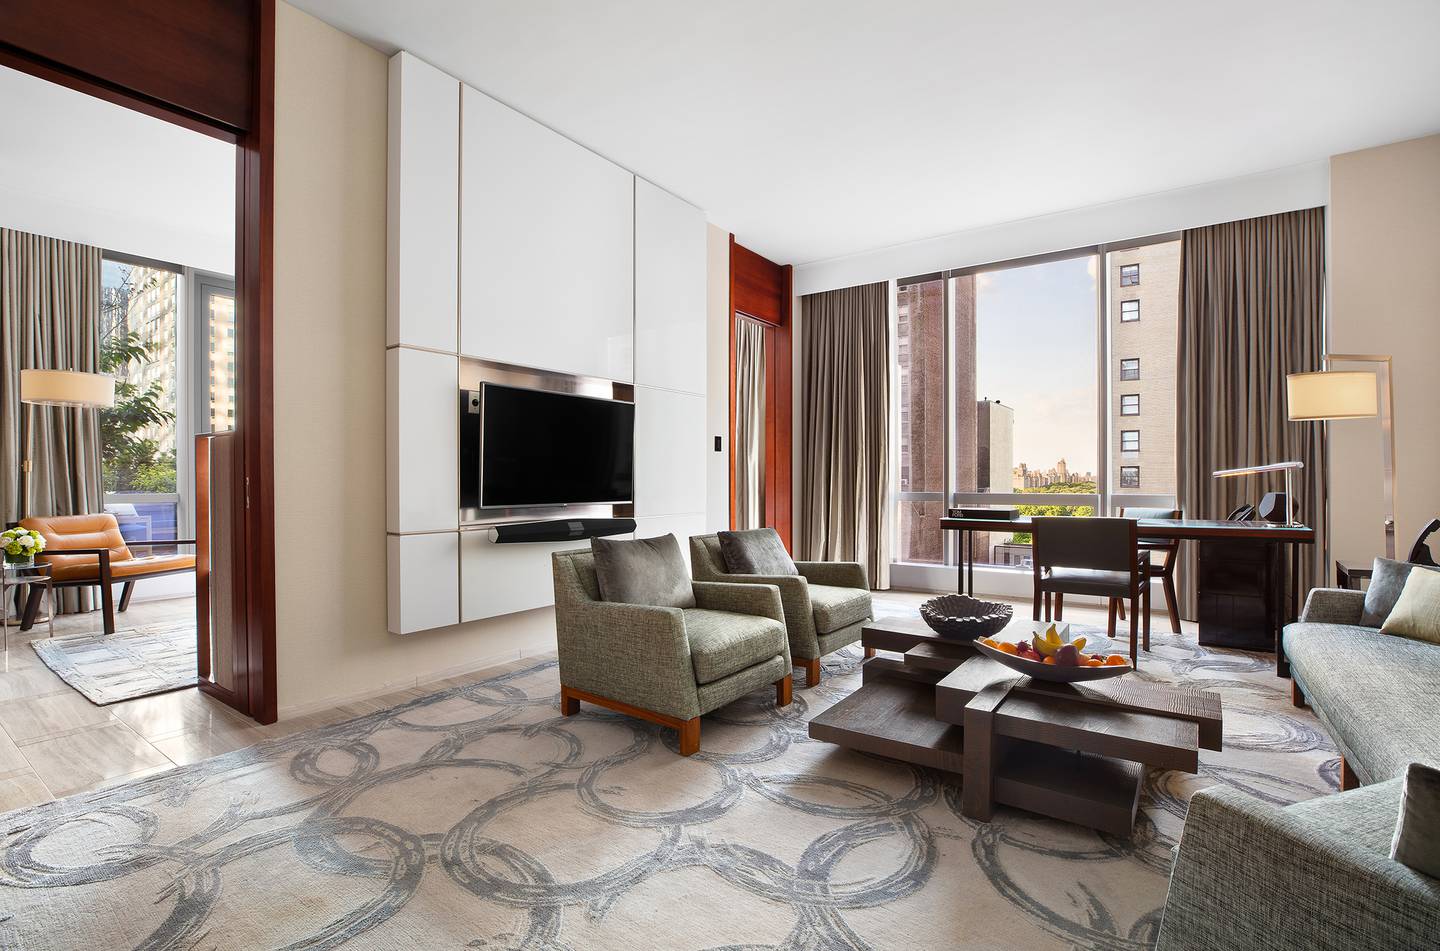 The 19th floor of the Park Hyatt New York includes several spacious living areas